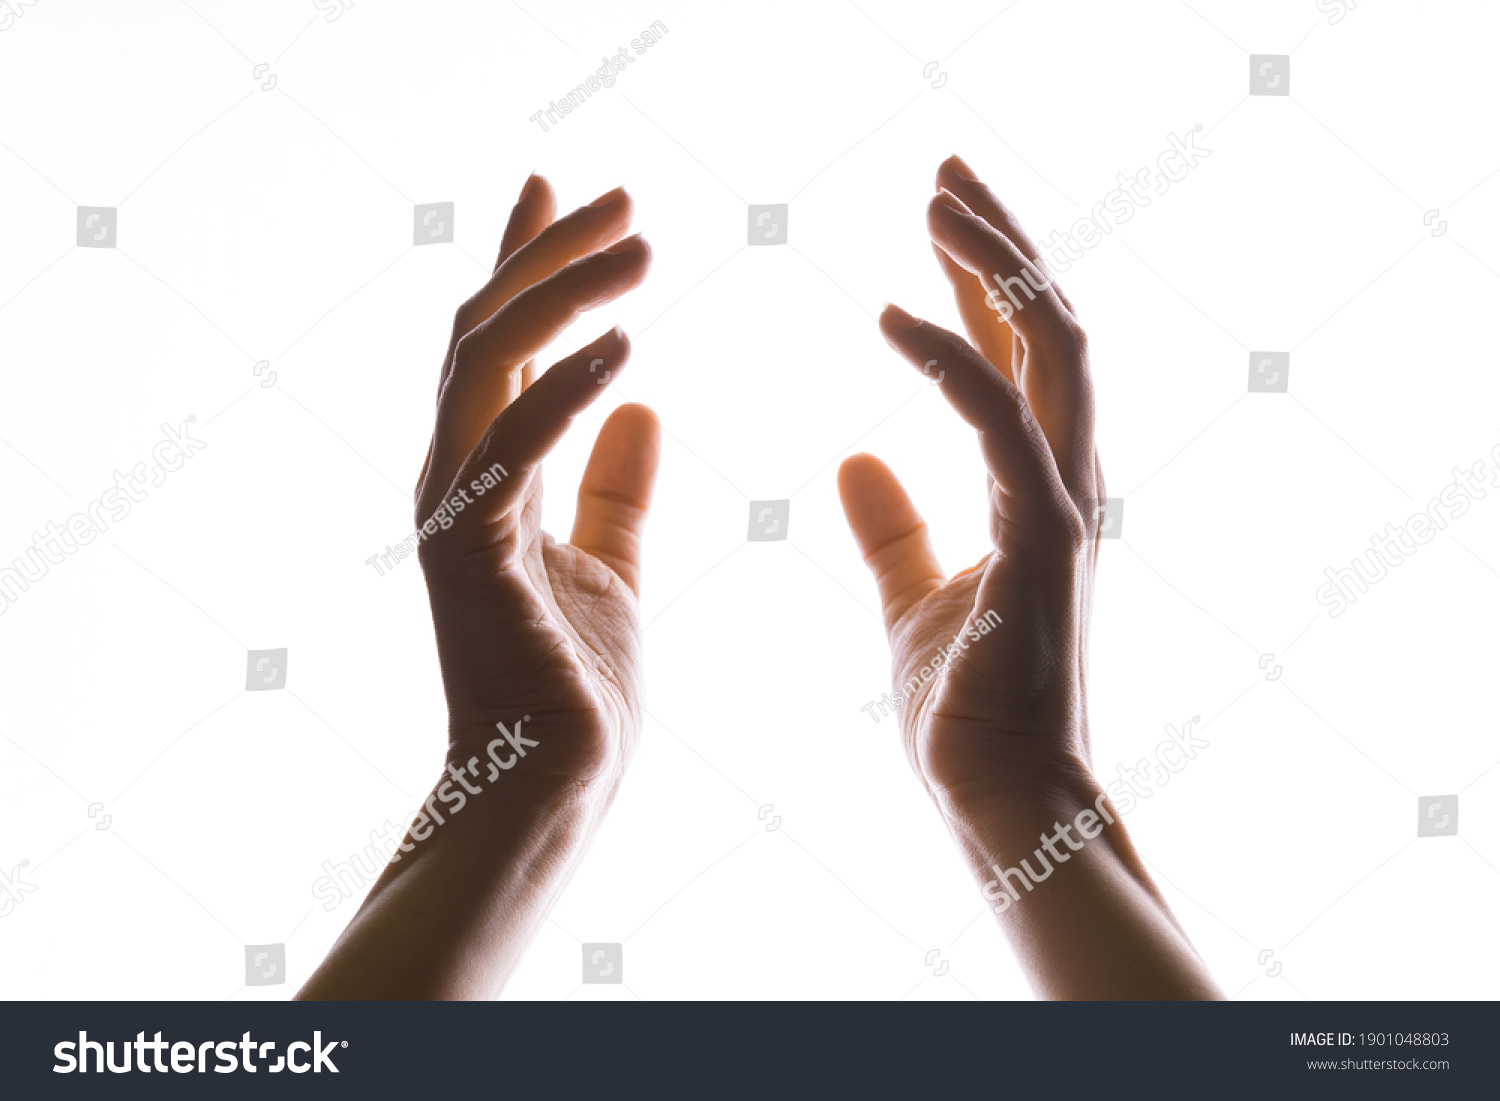 Hands make magic, or pray that the light falls from above on hand. Radiance between the palms. Gestures, isolated on white, contour lighting, contrast. #1901048803